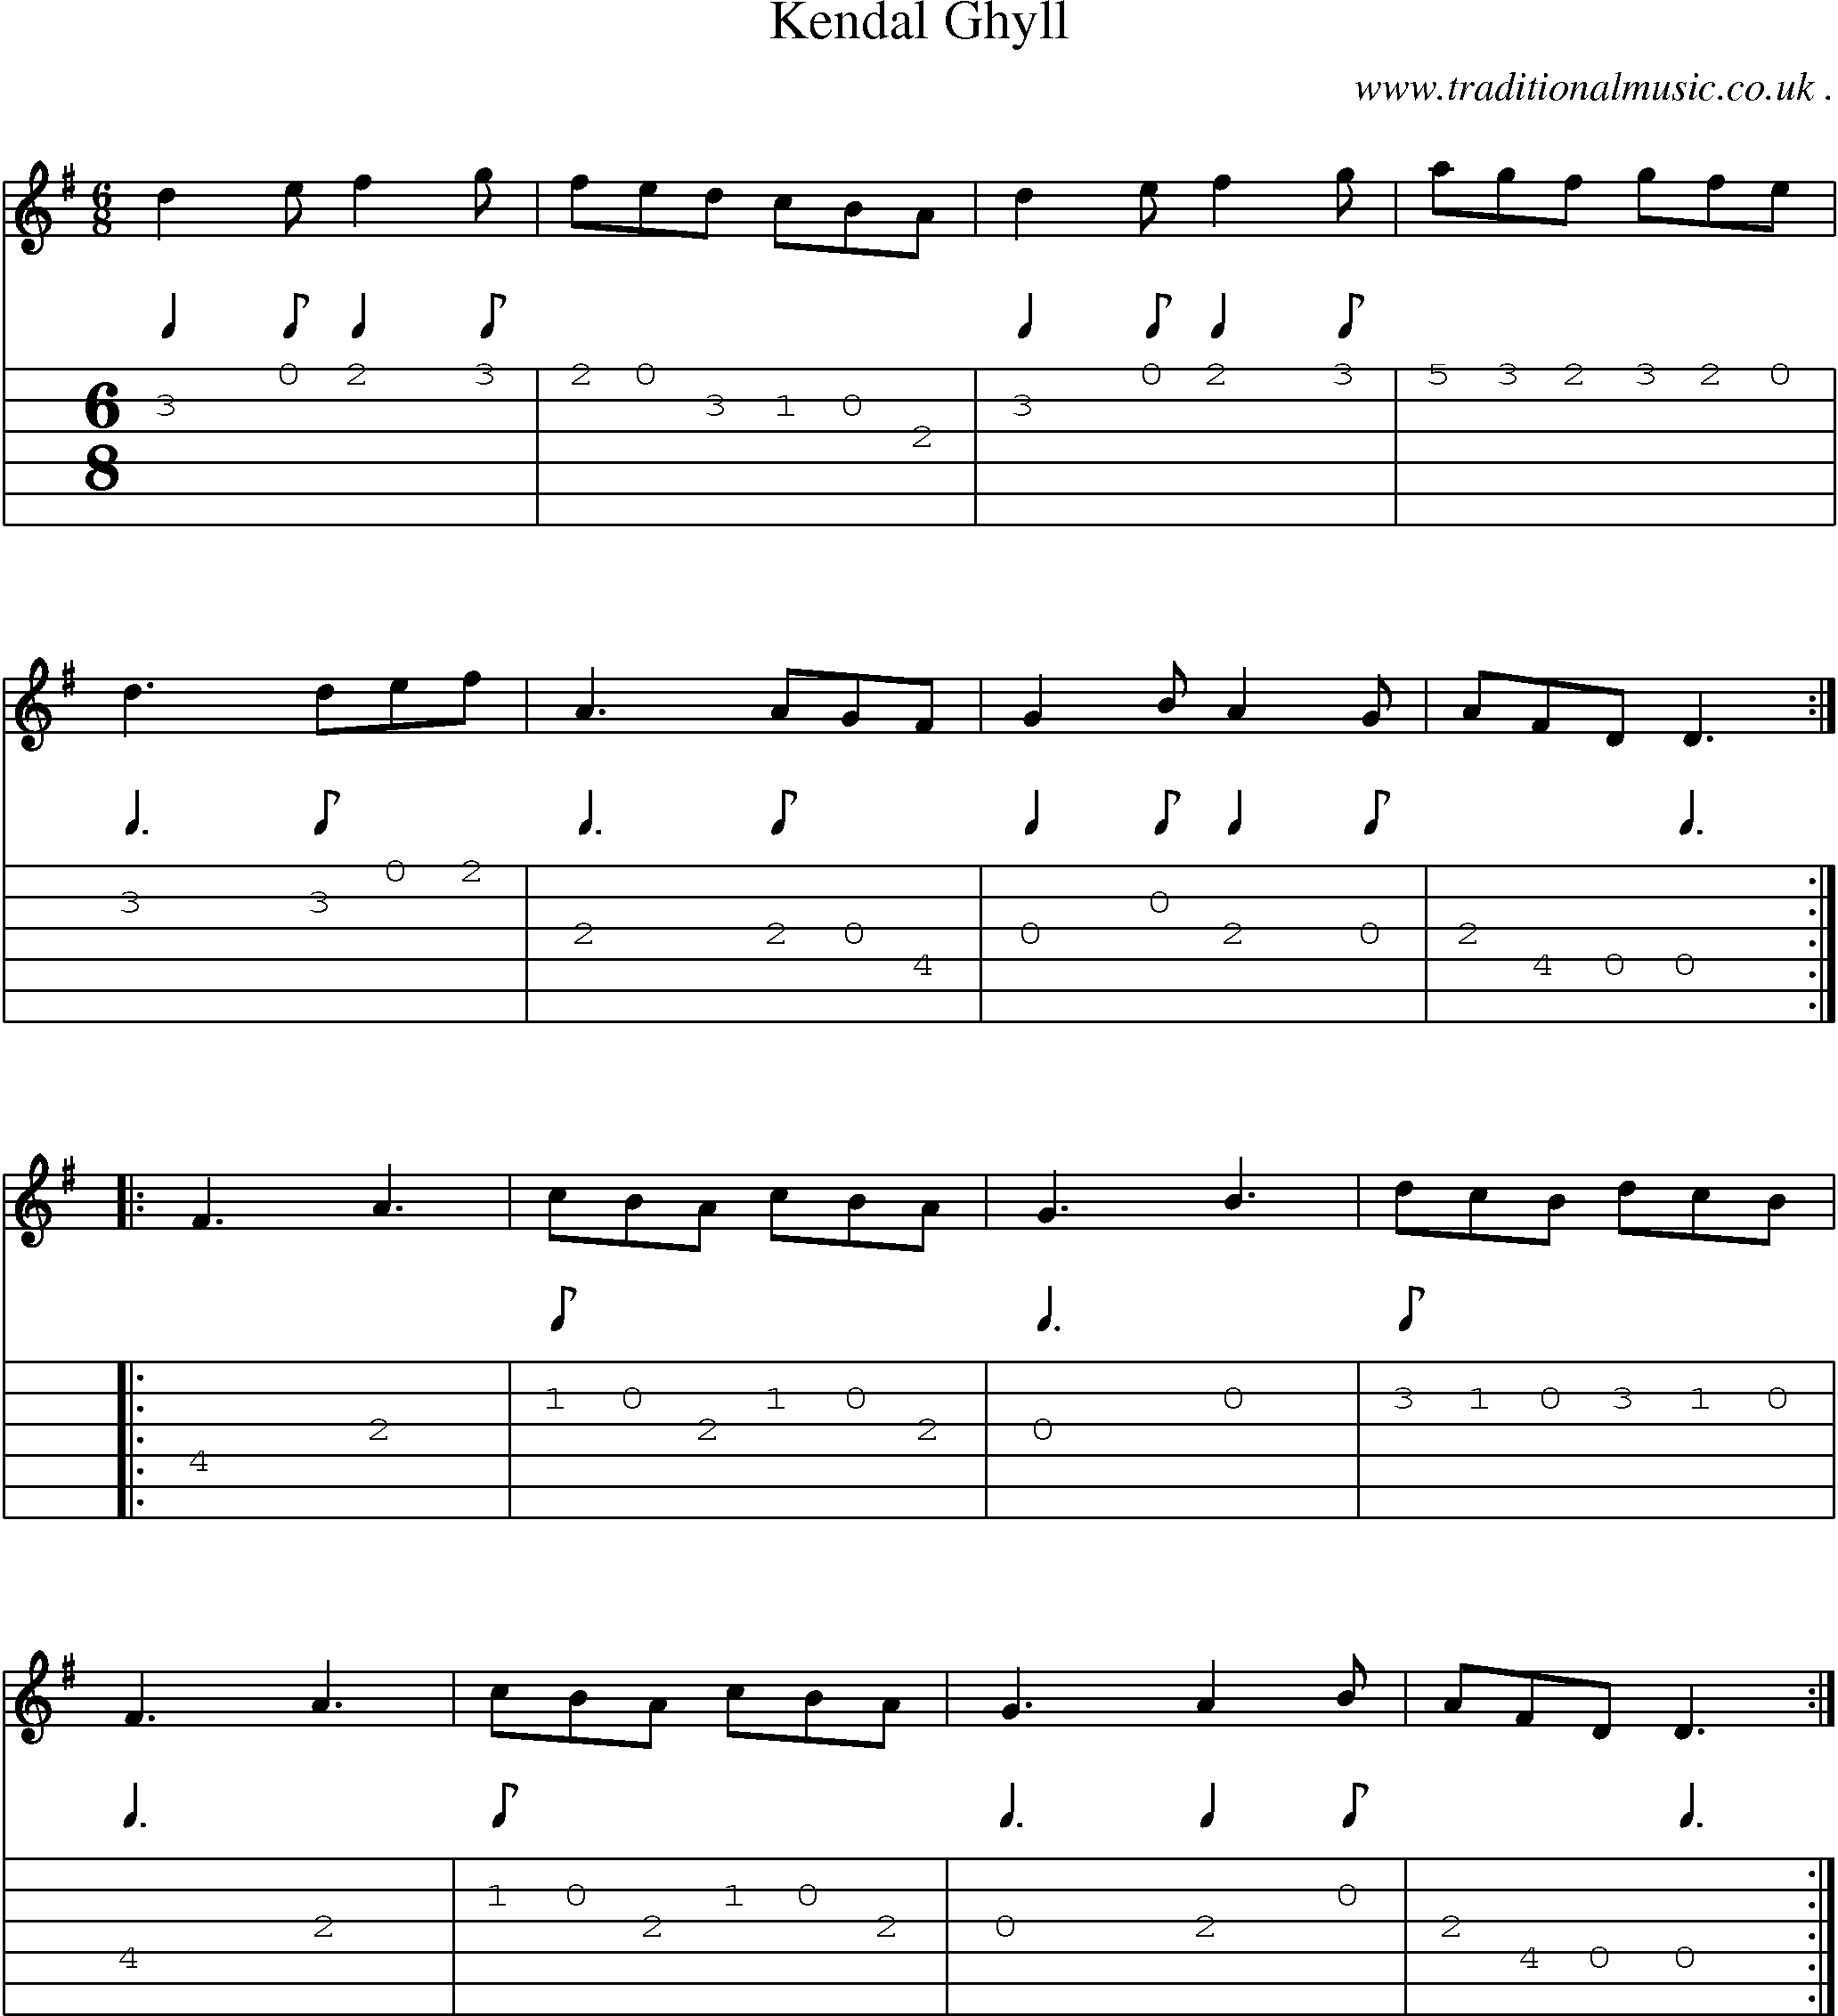 Sheet-Music and Guitar Tabs for Kendal Ghyll